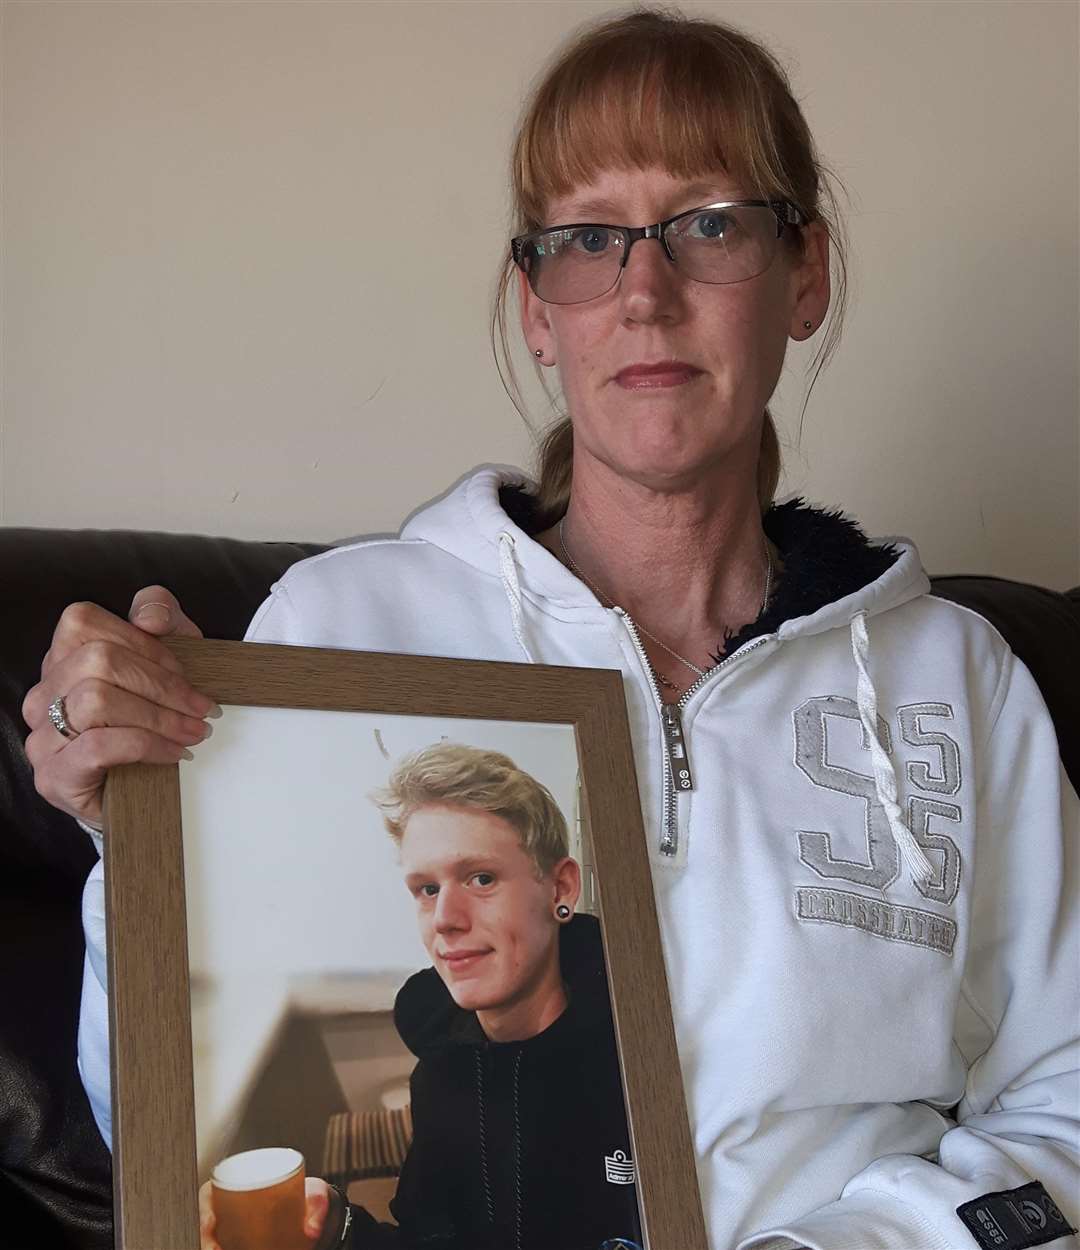 Michelle Parry's son, Robert Fraser, died from a fatal dose of fentanyl